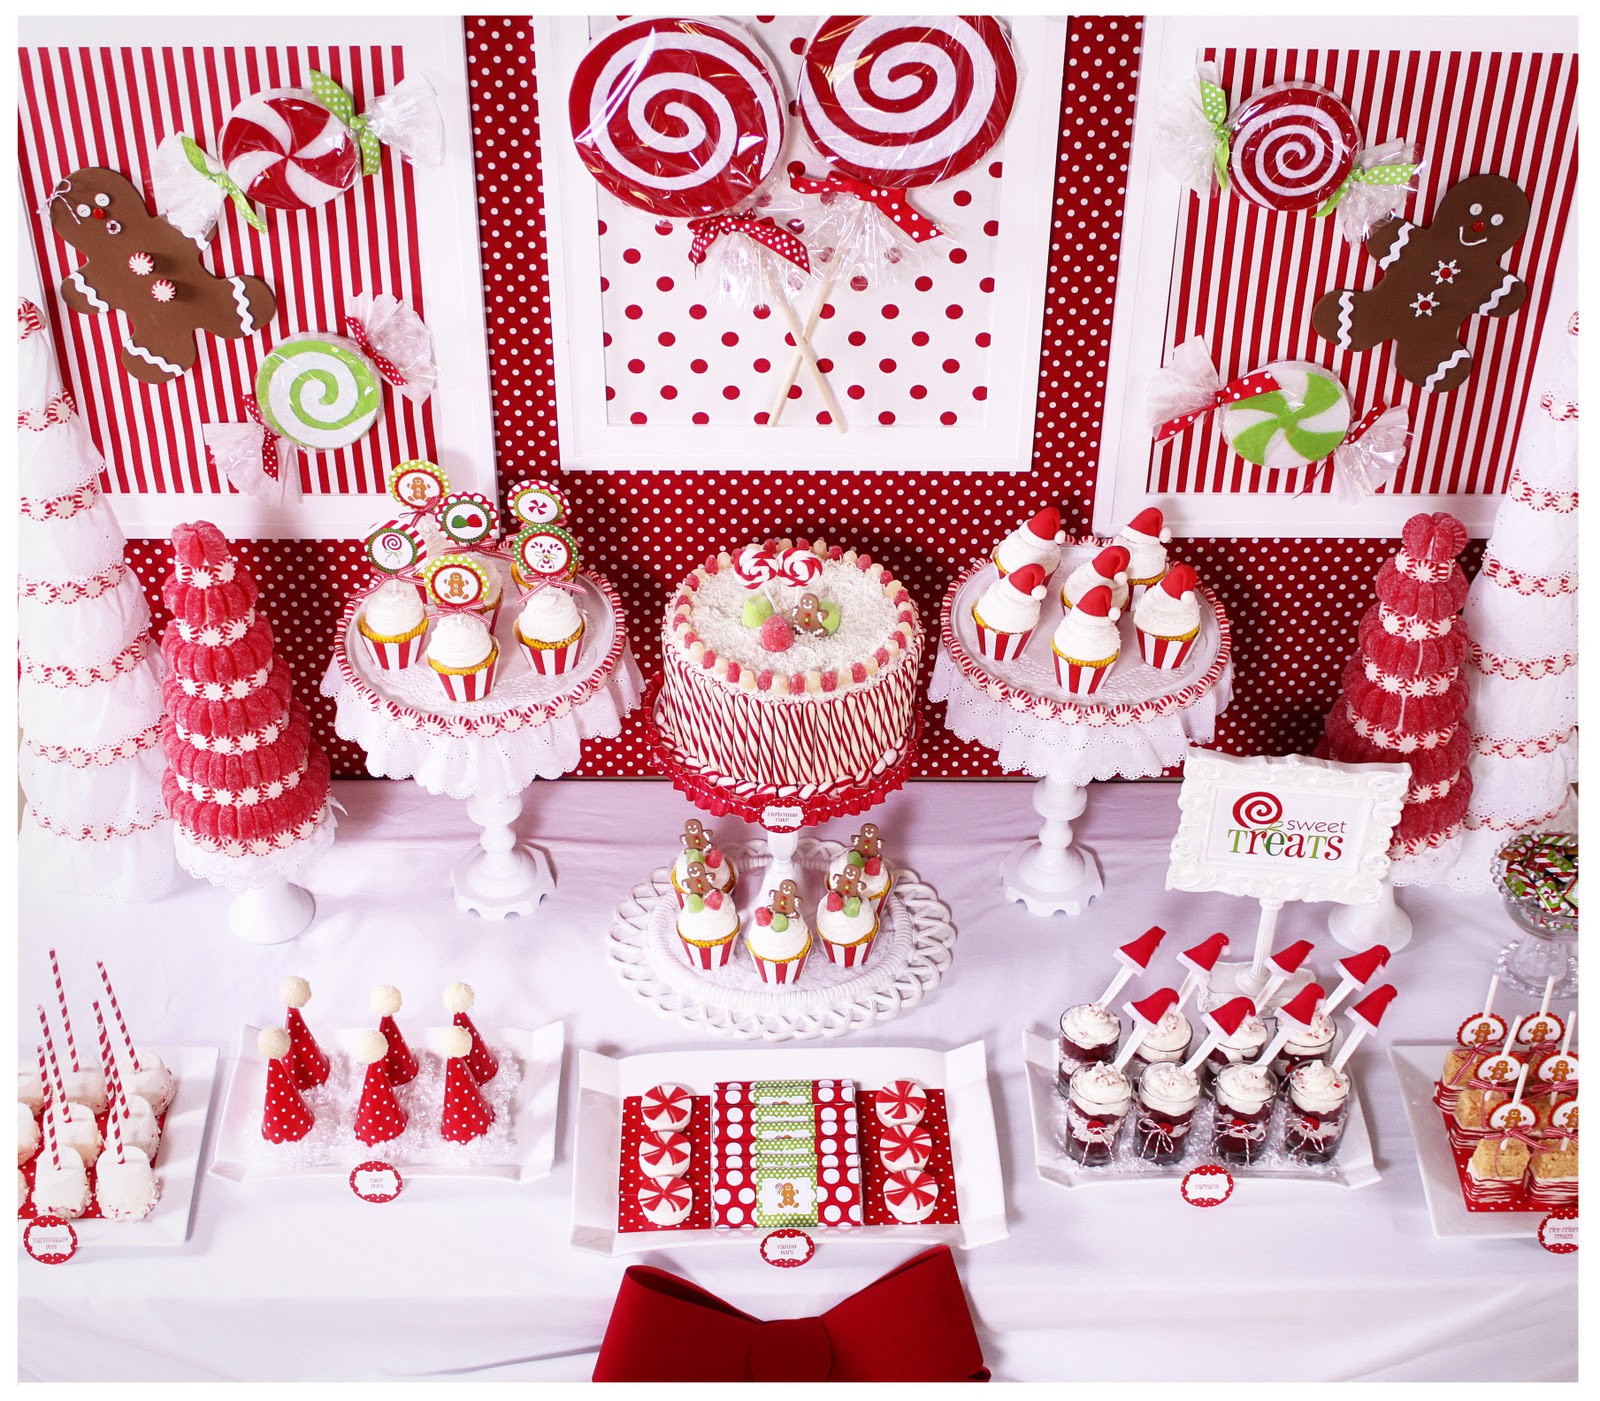 Holiday Party Theme Ideas
 20 Christmas Party Decorations Ideas for This Year